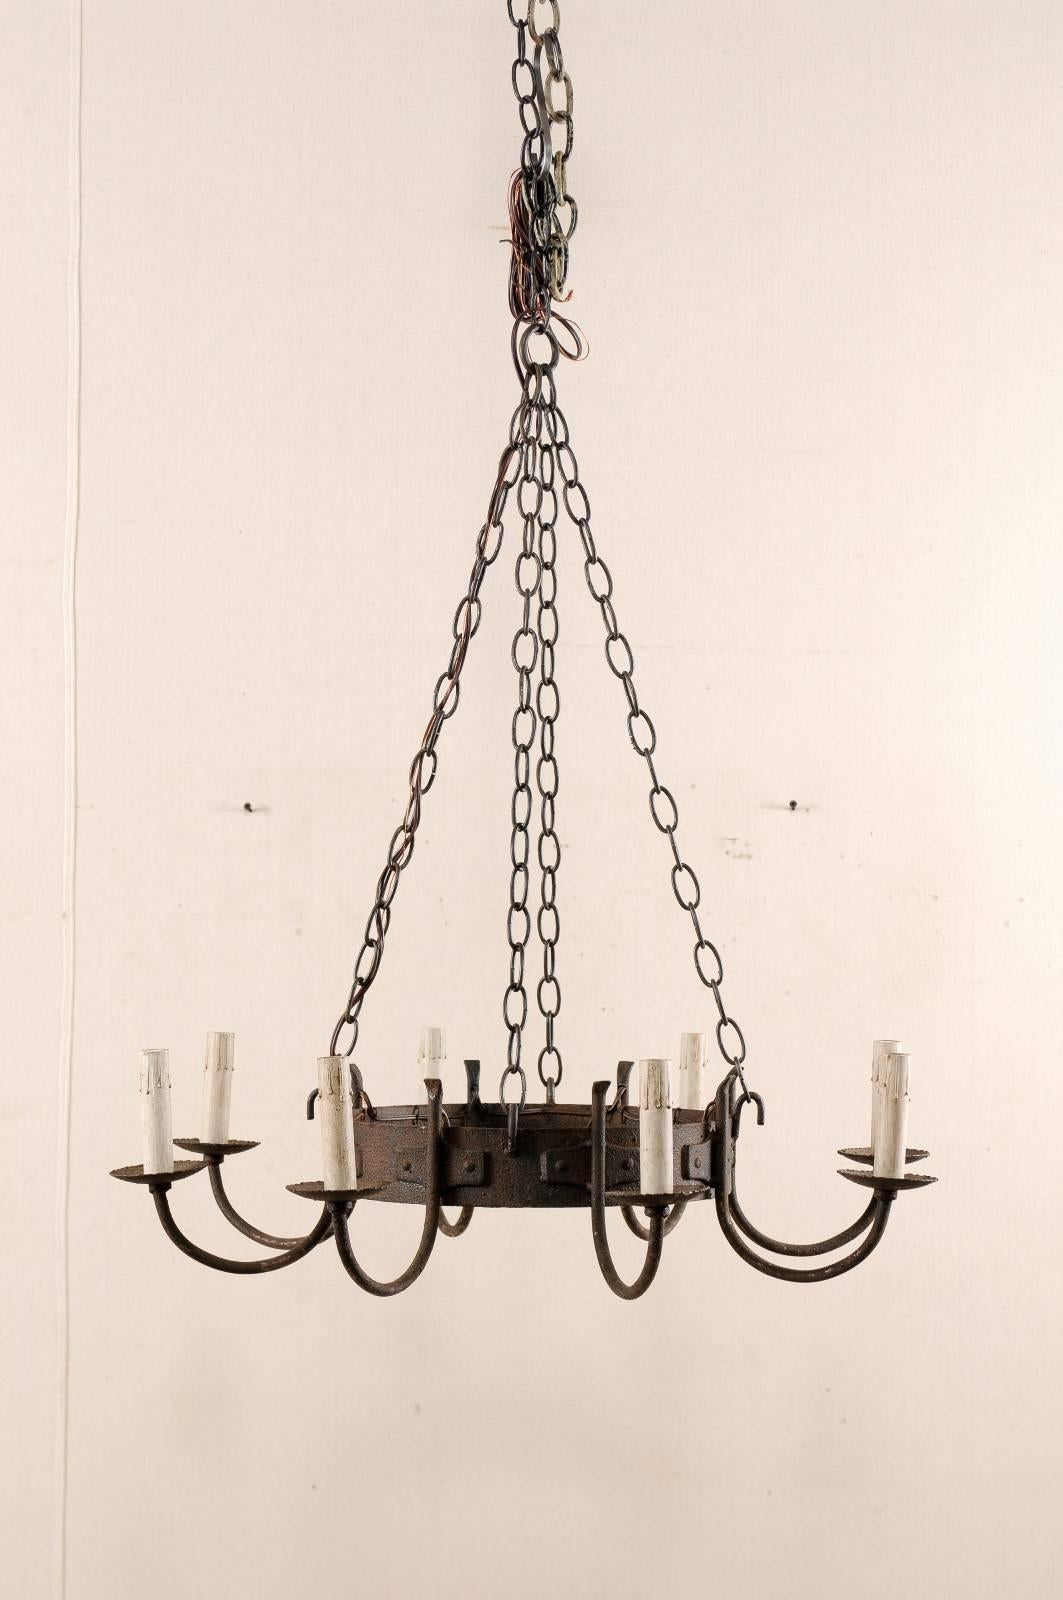 A French mid-20th century eight-light circular chandelier. This French chandelier, from the mid-20th century, features a circular shaped centre body with eight c-swooping arms flowing out from the exterior of the ring. Each of the swooping arms